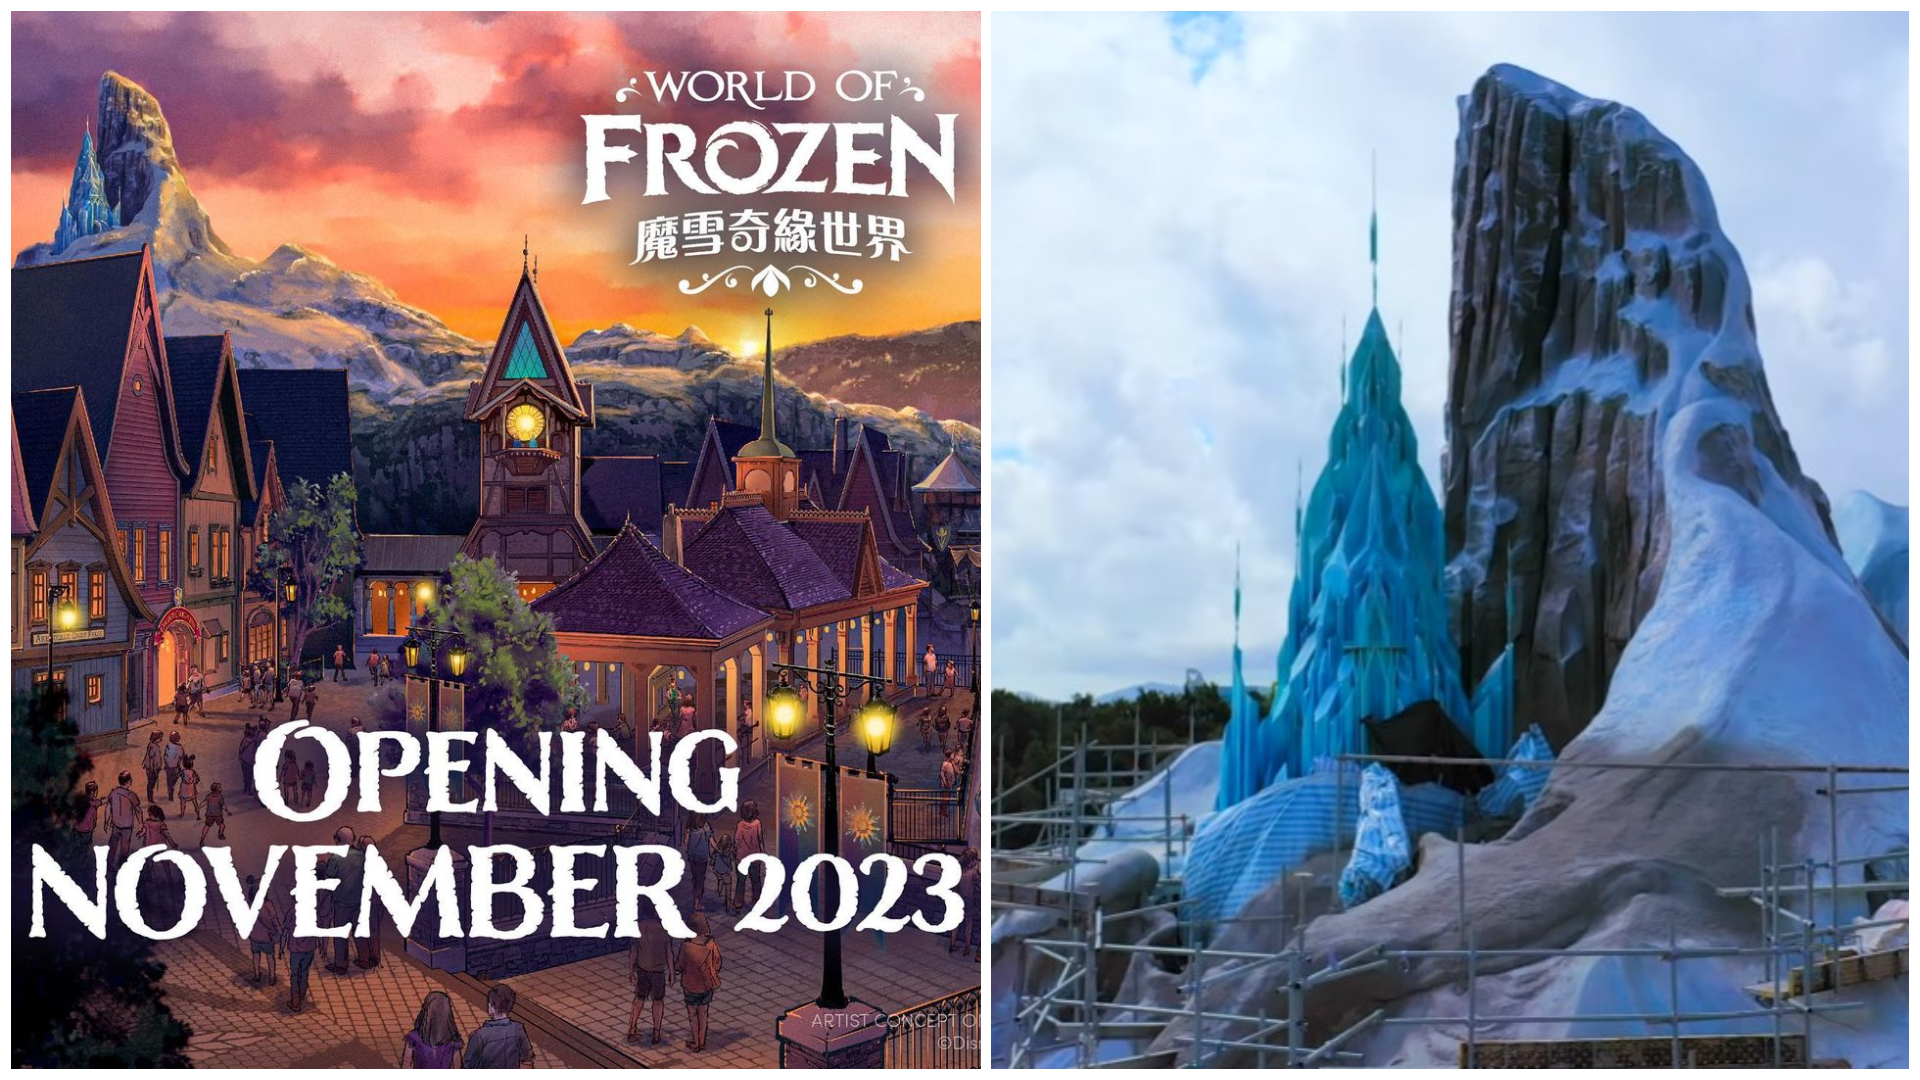 Arendelle from Disney’s Frozen is coming to life at HongKong Disneyland